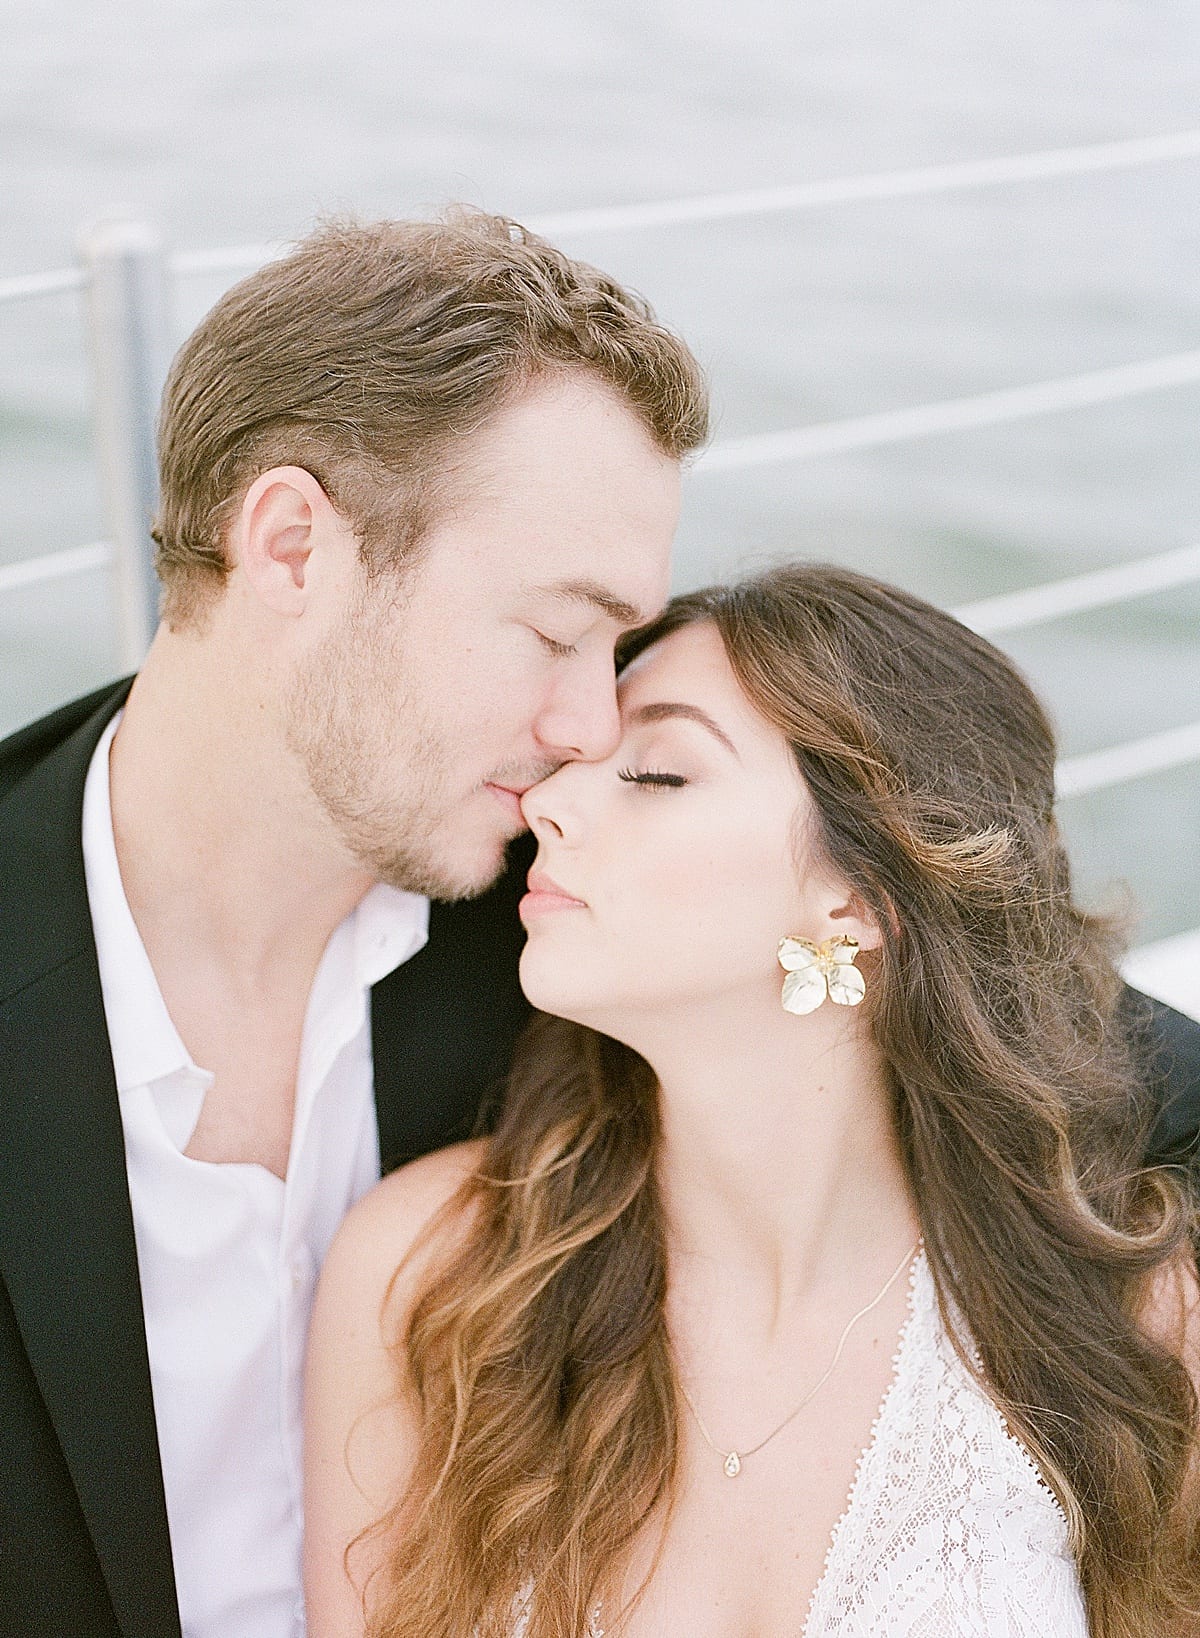 Bride and Groom Snuggling Nose to Nose on Sailboat Photo